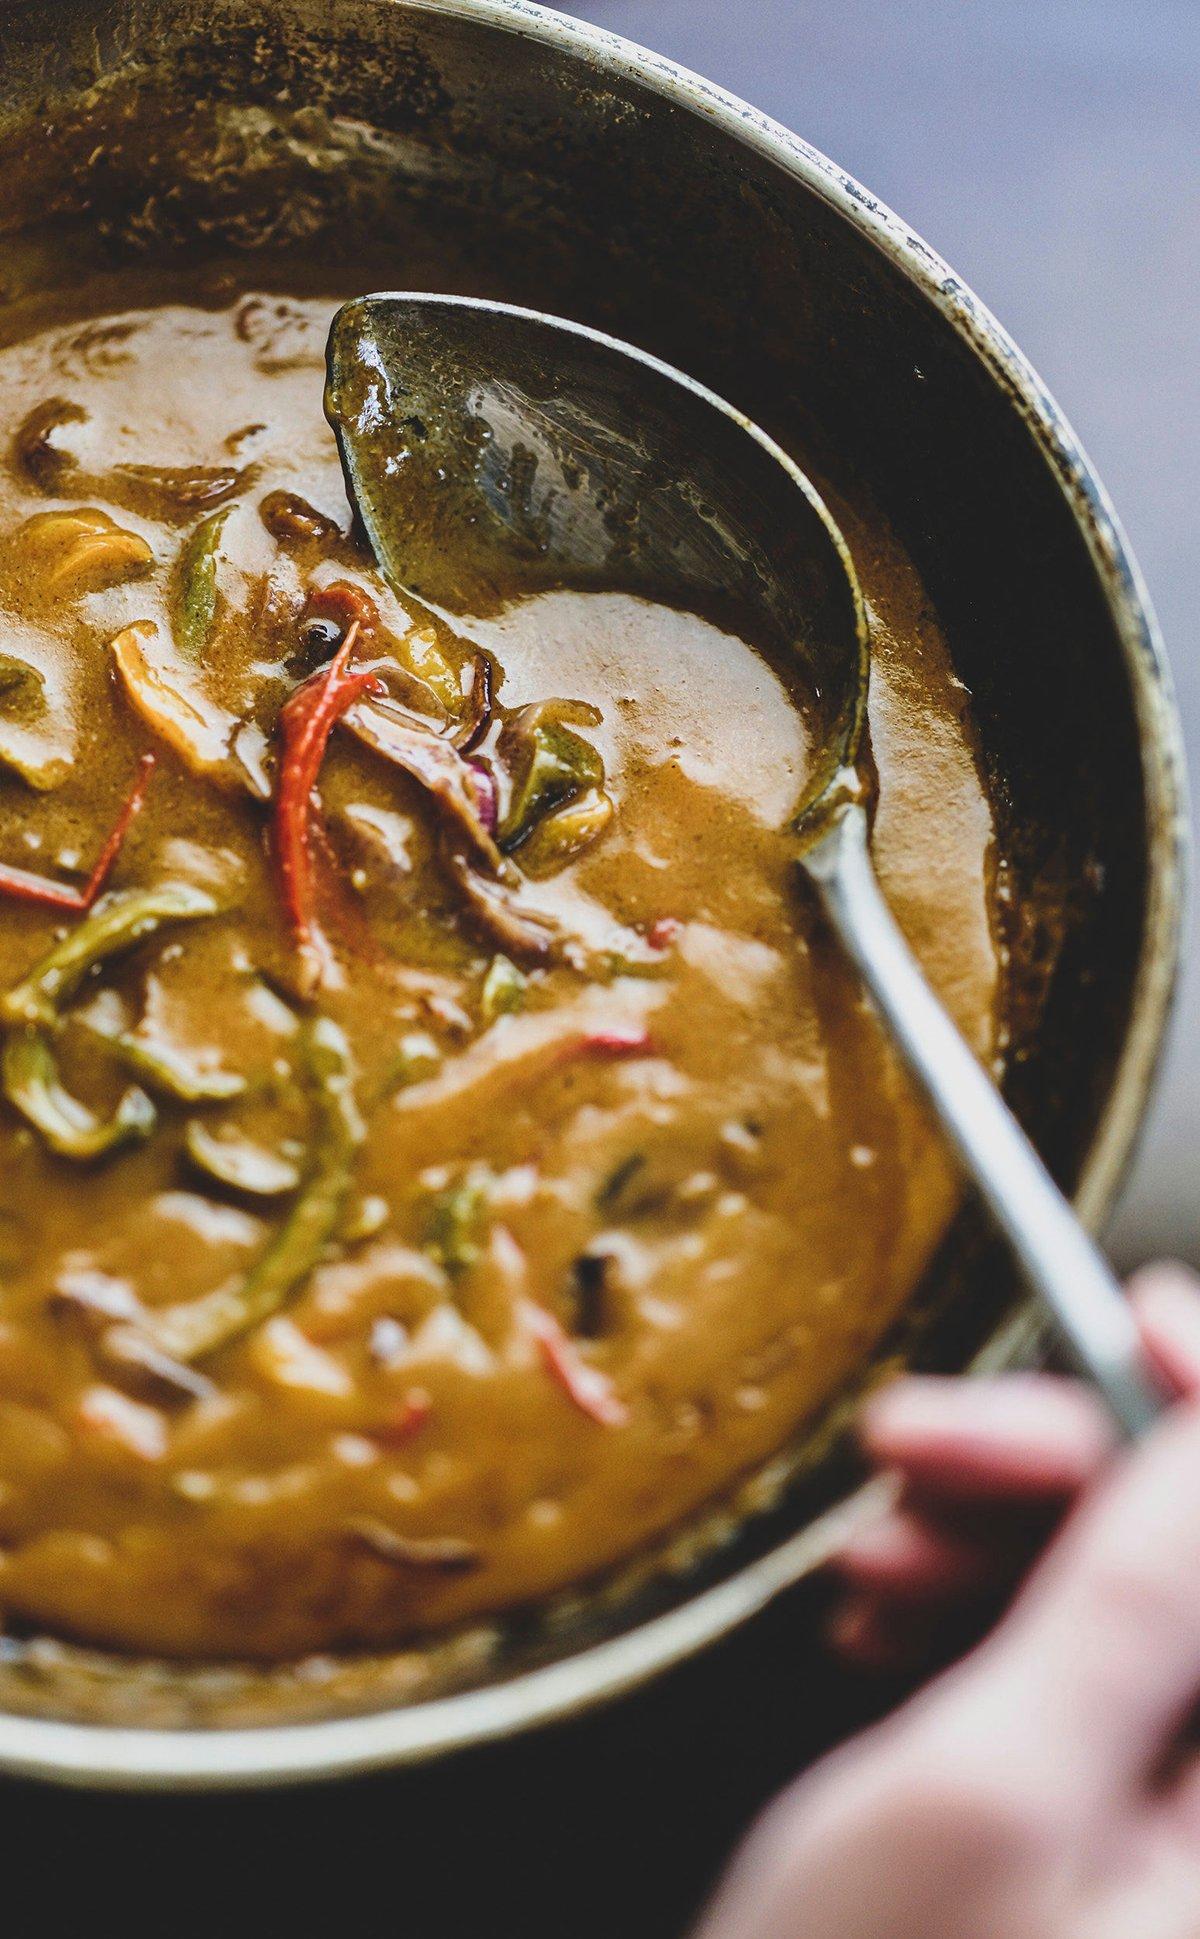 Etouffee is French for “smothered.” Image by Grit Media